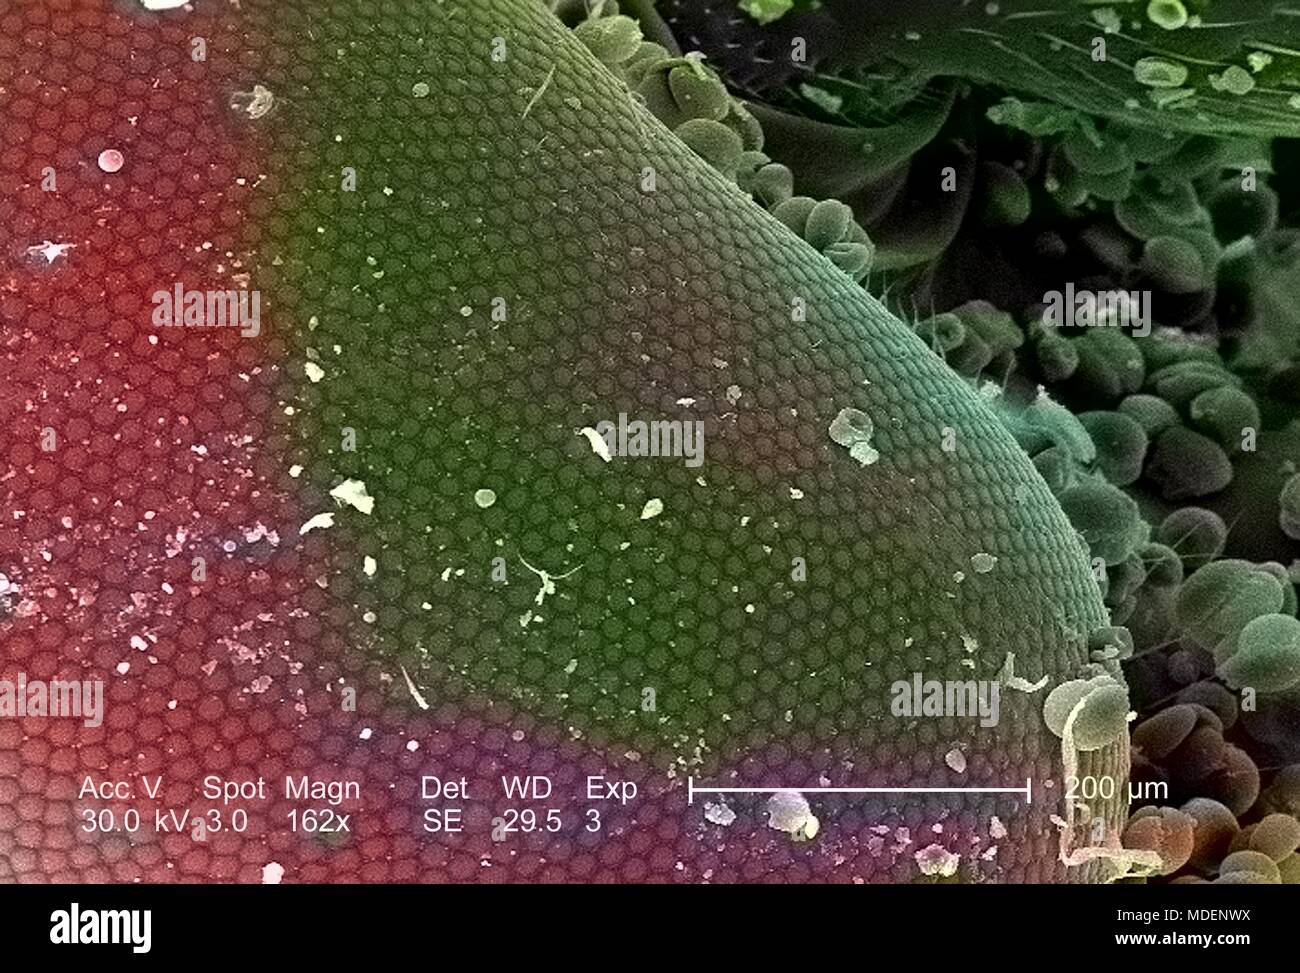 Compound eye of an unidentified green-colored flying insect found the Decatur, Georgia, revealed in the 162x magnified scanning electron microscopic (SEM) image, 2005. Image courtesy Centers for Disease Control (CDC) / Janice Haney Carr. Note: Image has been digitally colorized using a modern process. Colors may not be scientifically accurate. () Stock Photo